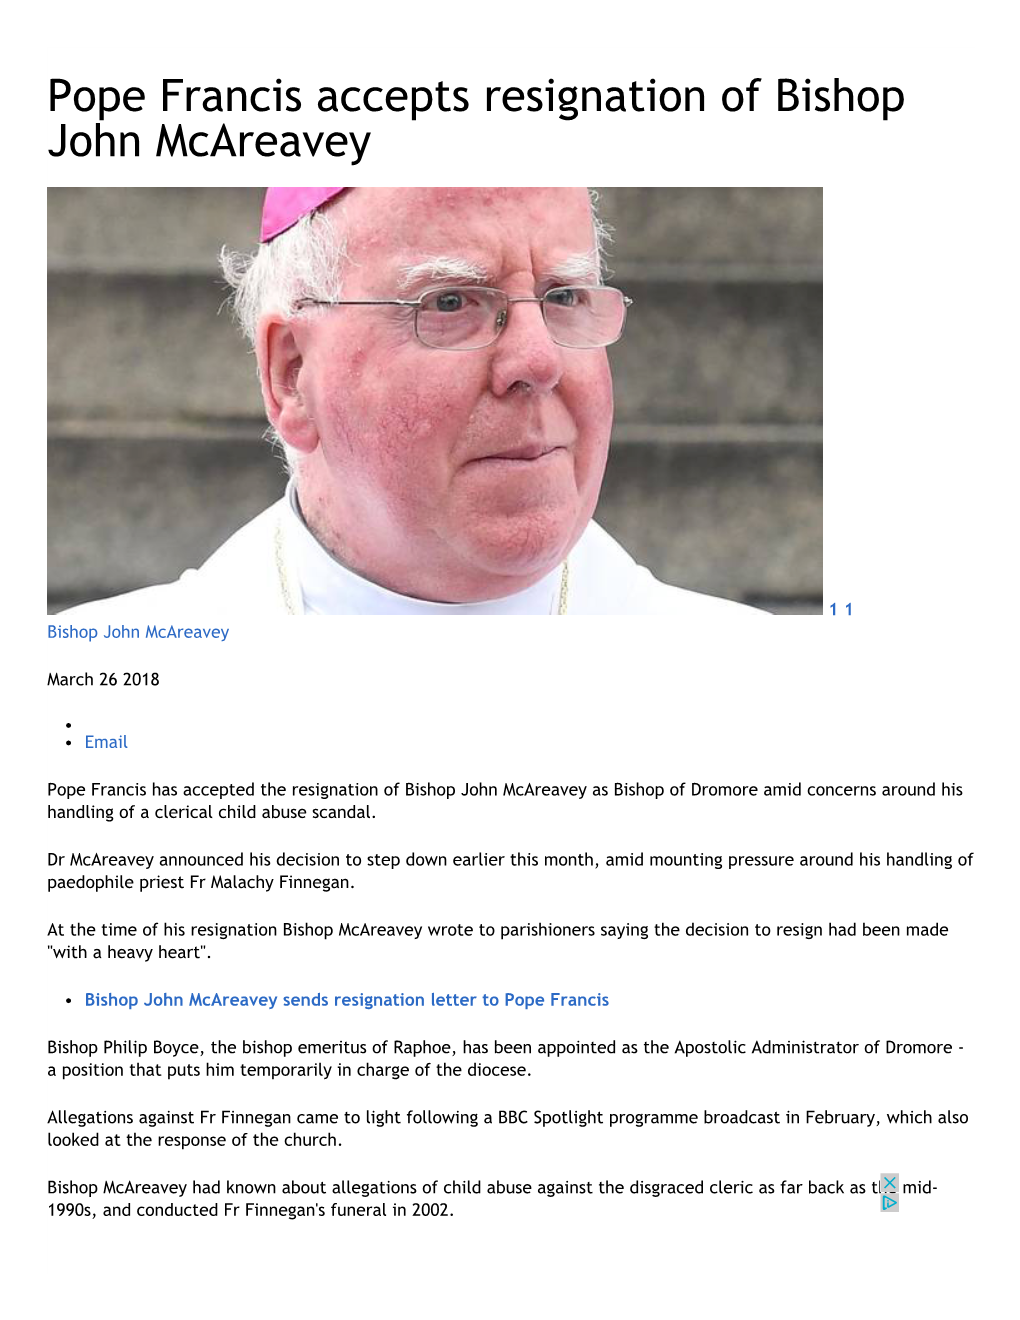 Pope Francis Accepts Resignation of Bishop John Mcareavey